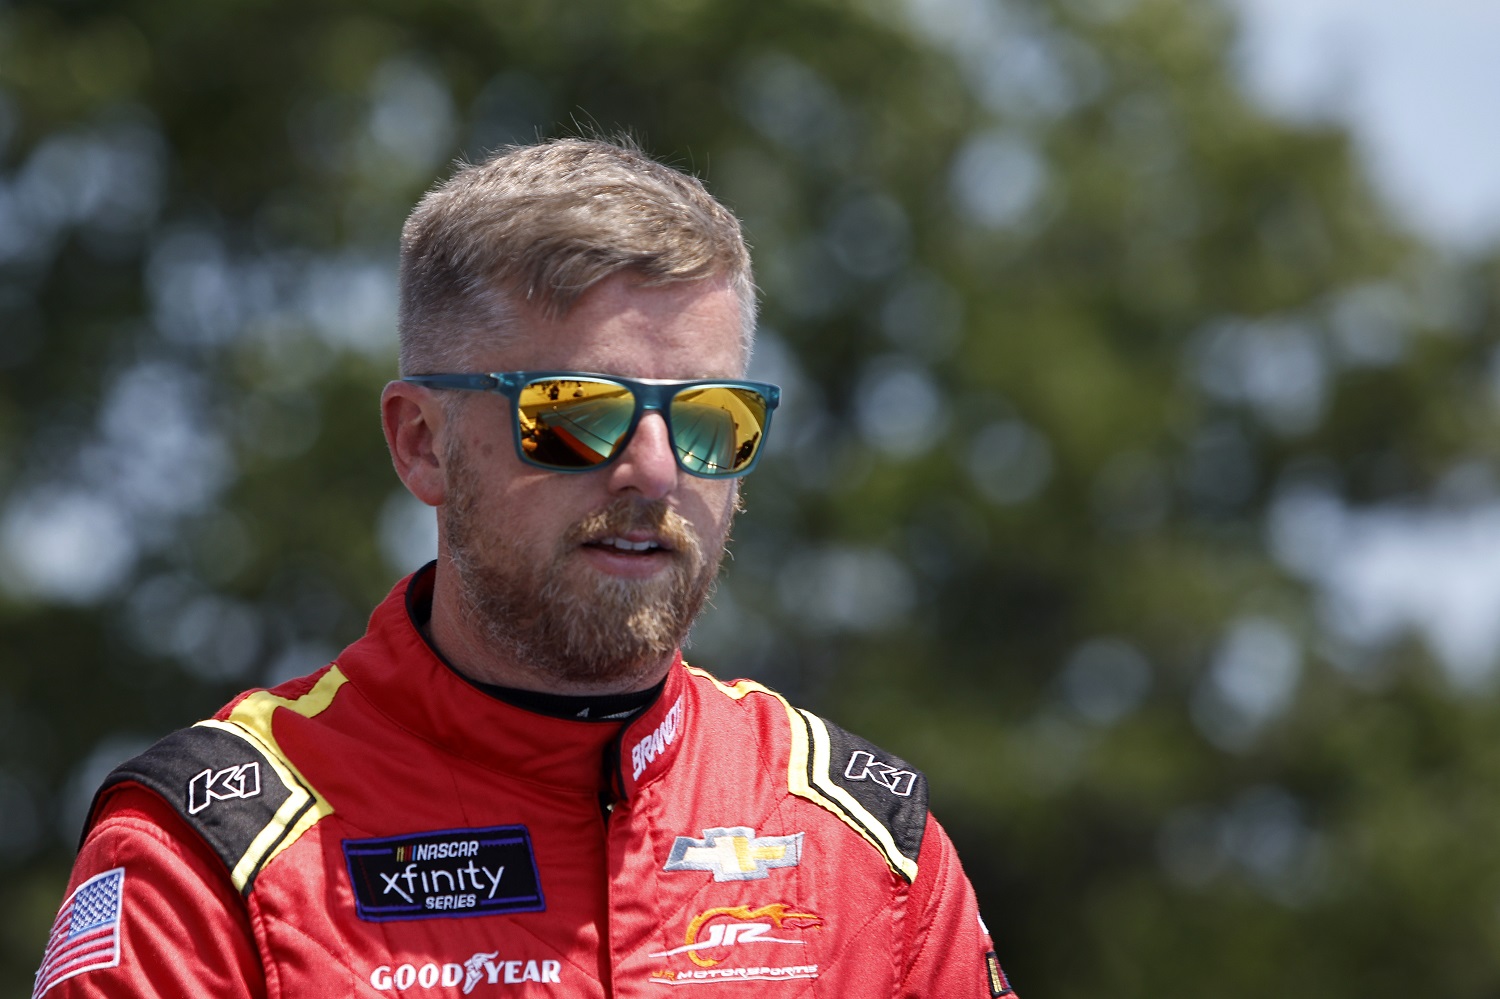 Justin Allgaier prior to the NASCAR Xfinity Series Henry 180 at Road America on July 2, 2022 in Elkhart Lake, Wisconsin.